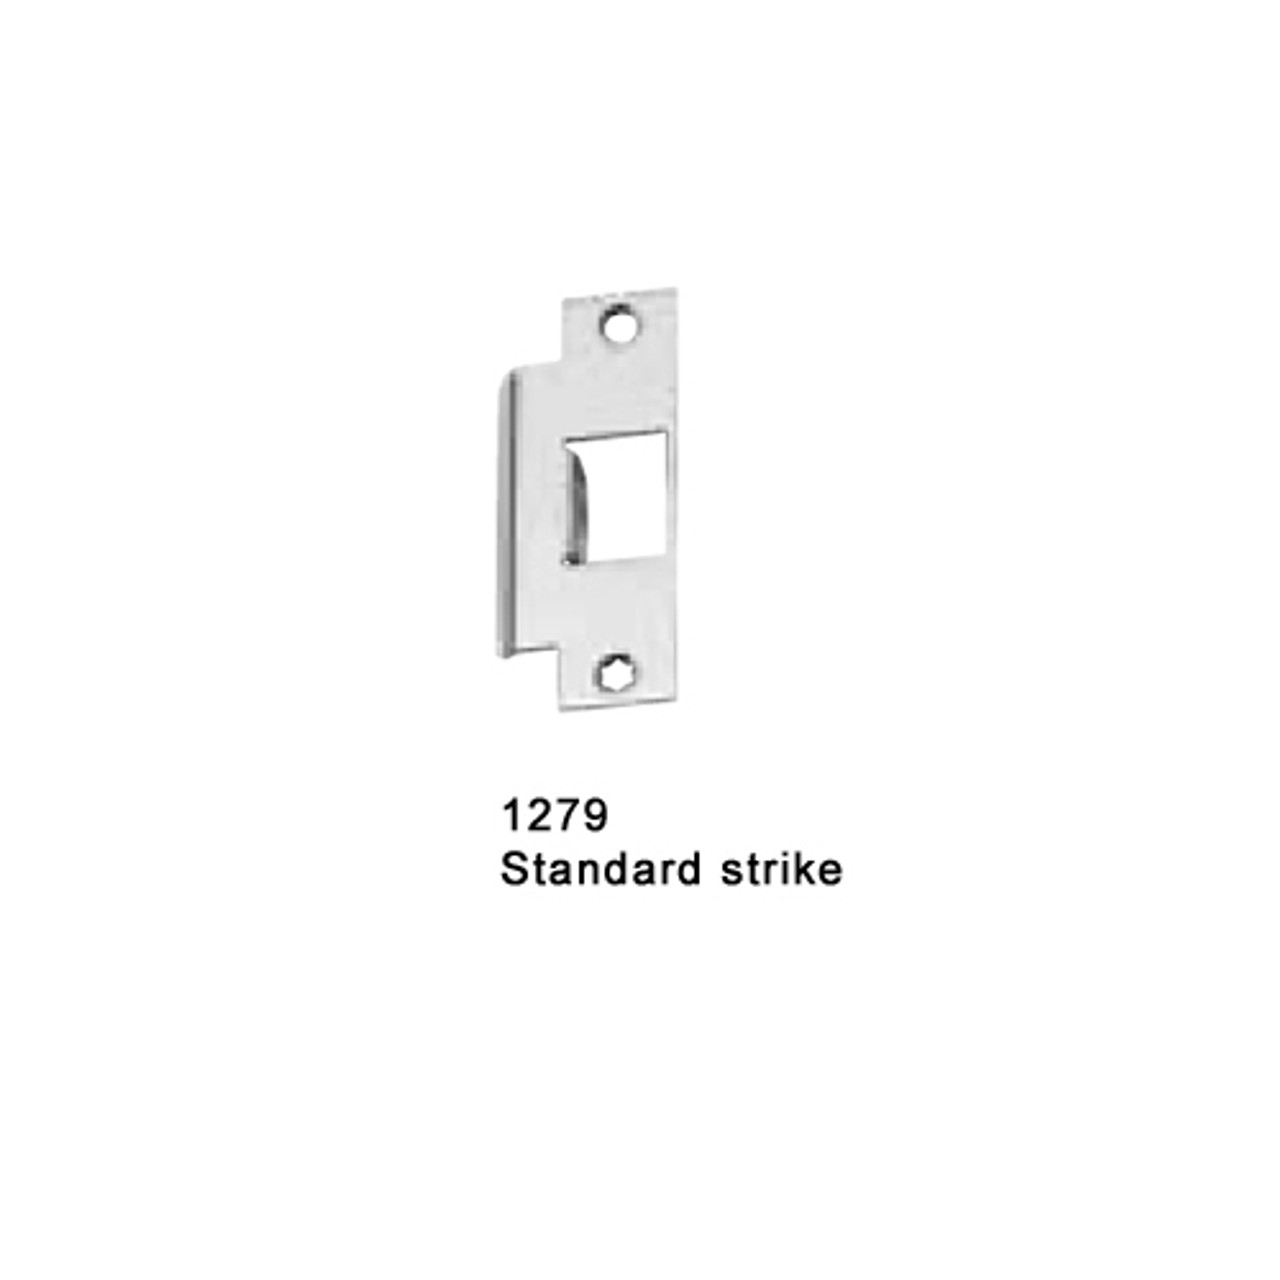 F-25-M-NL-US28-3-LHR Falcon 25 Series Fire Rated Mortise Lock Devices with 512-NL Night Latch in Anodized Aluminum